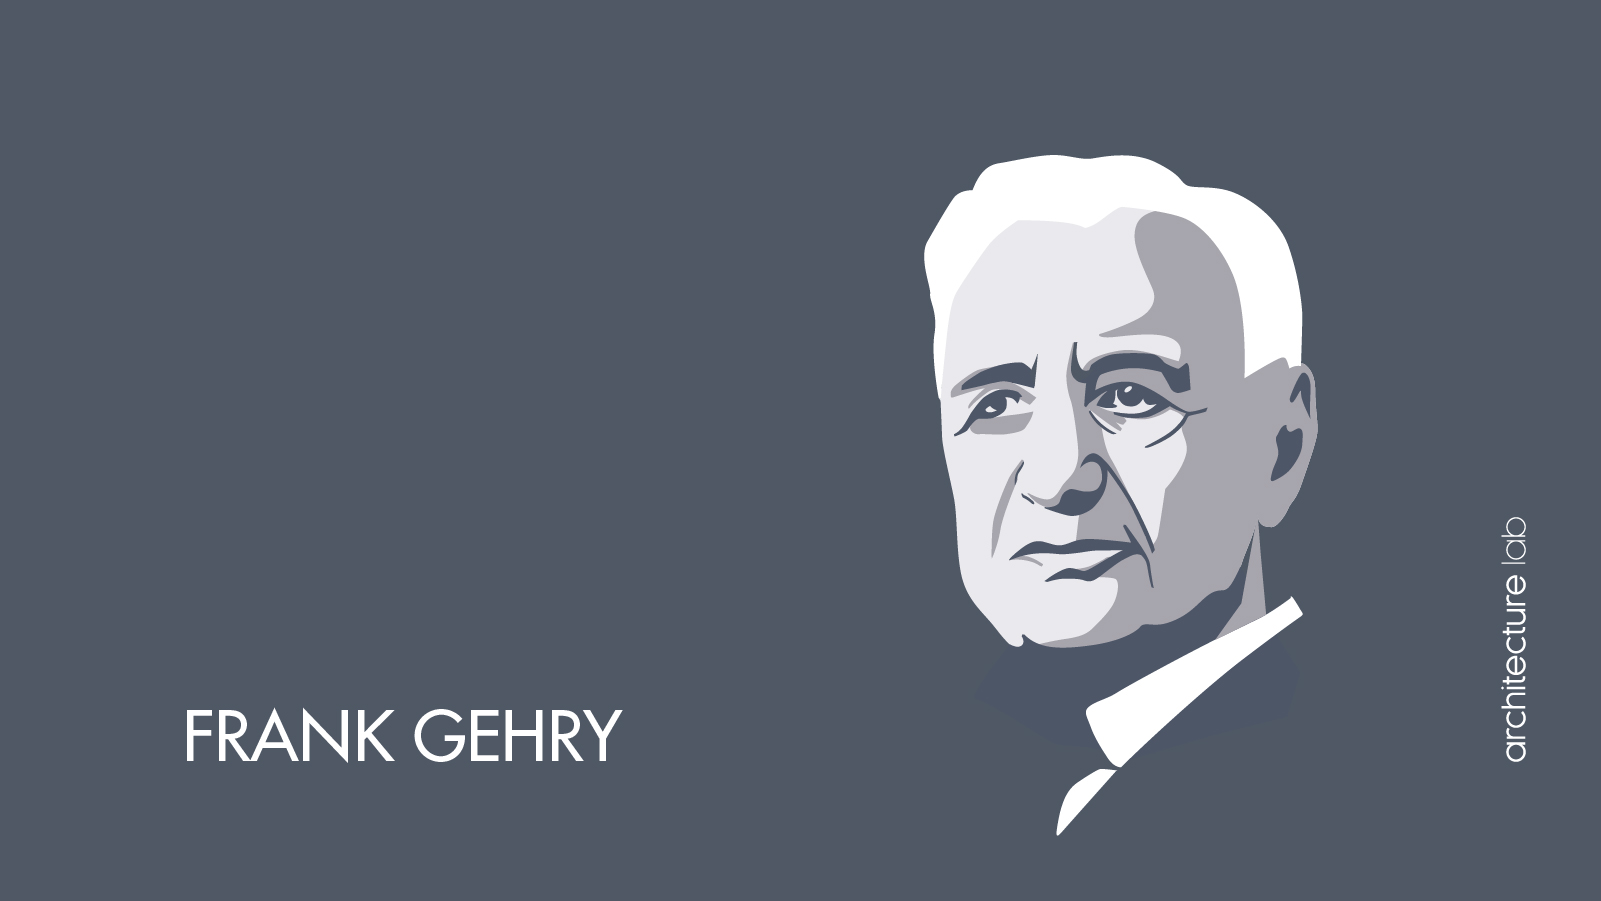 Frank gehry: biography, works, awards